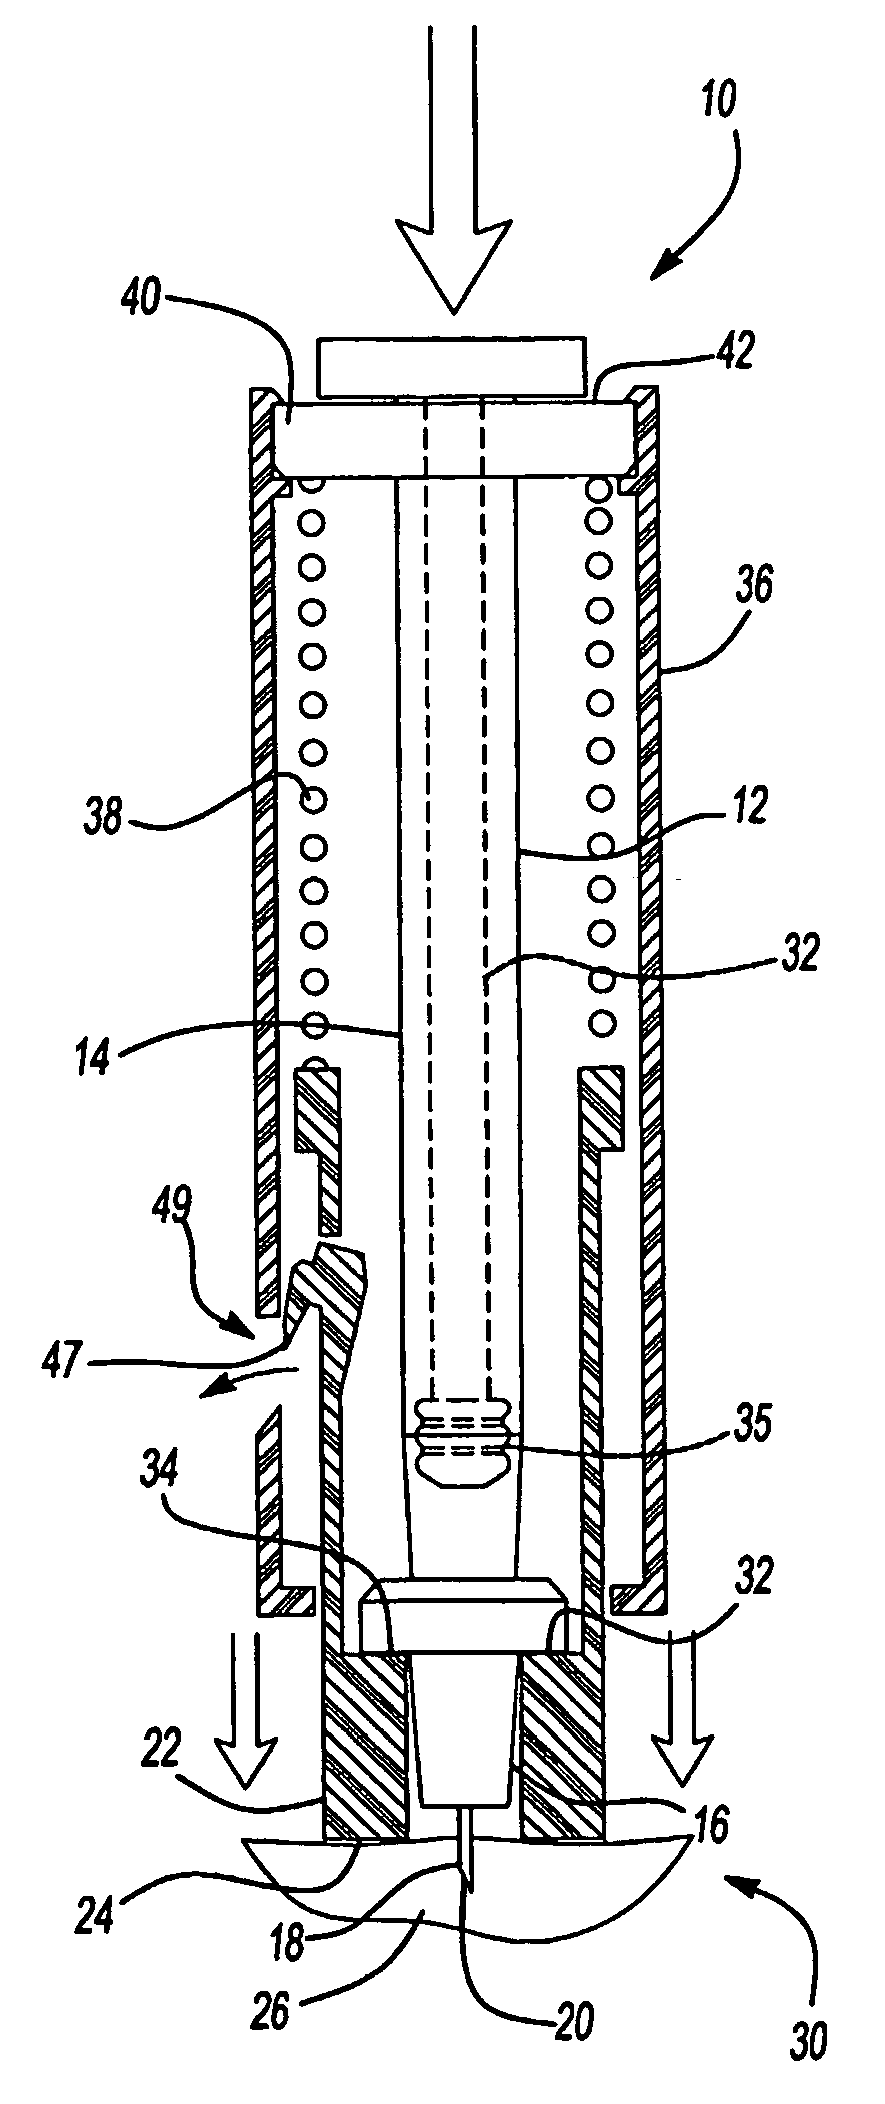 Prefillable intradermal delivery device with hidden needle and passive shielding